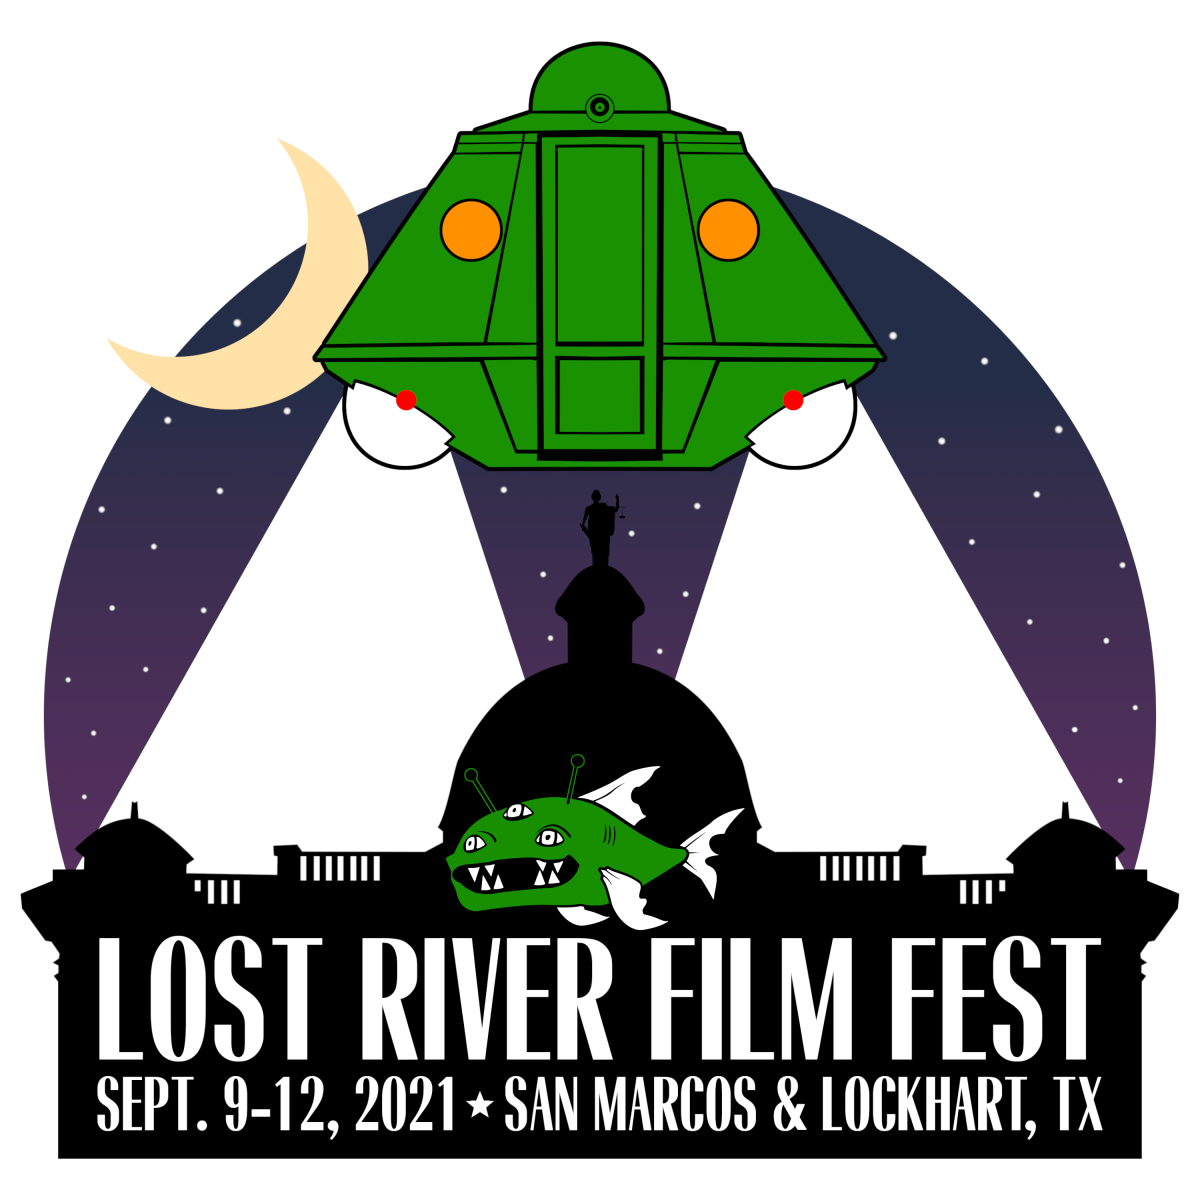 This+years+Lost+River+Film+Fest+will+take+place+from+Sept.+9-12+in+San+Marcos+and+Lockhart%2C+Texas.